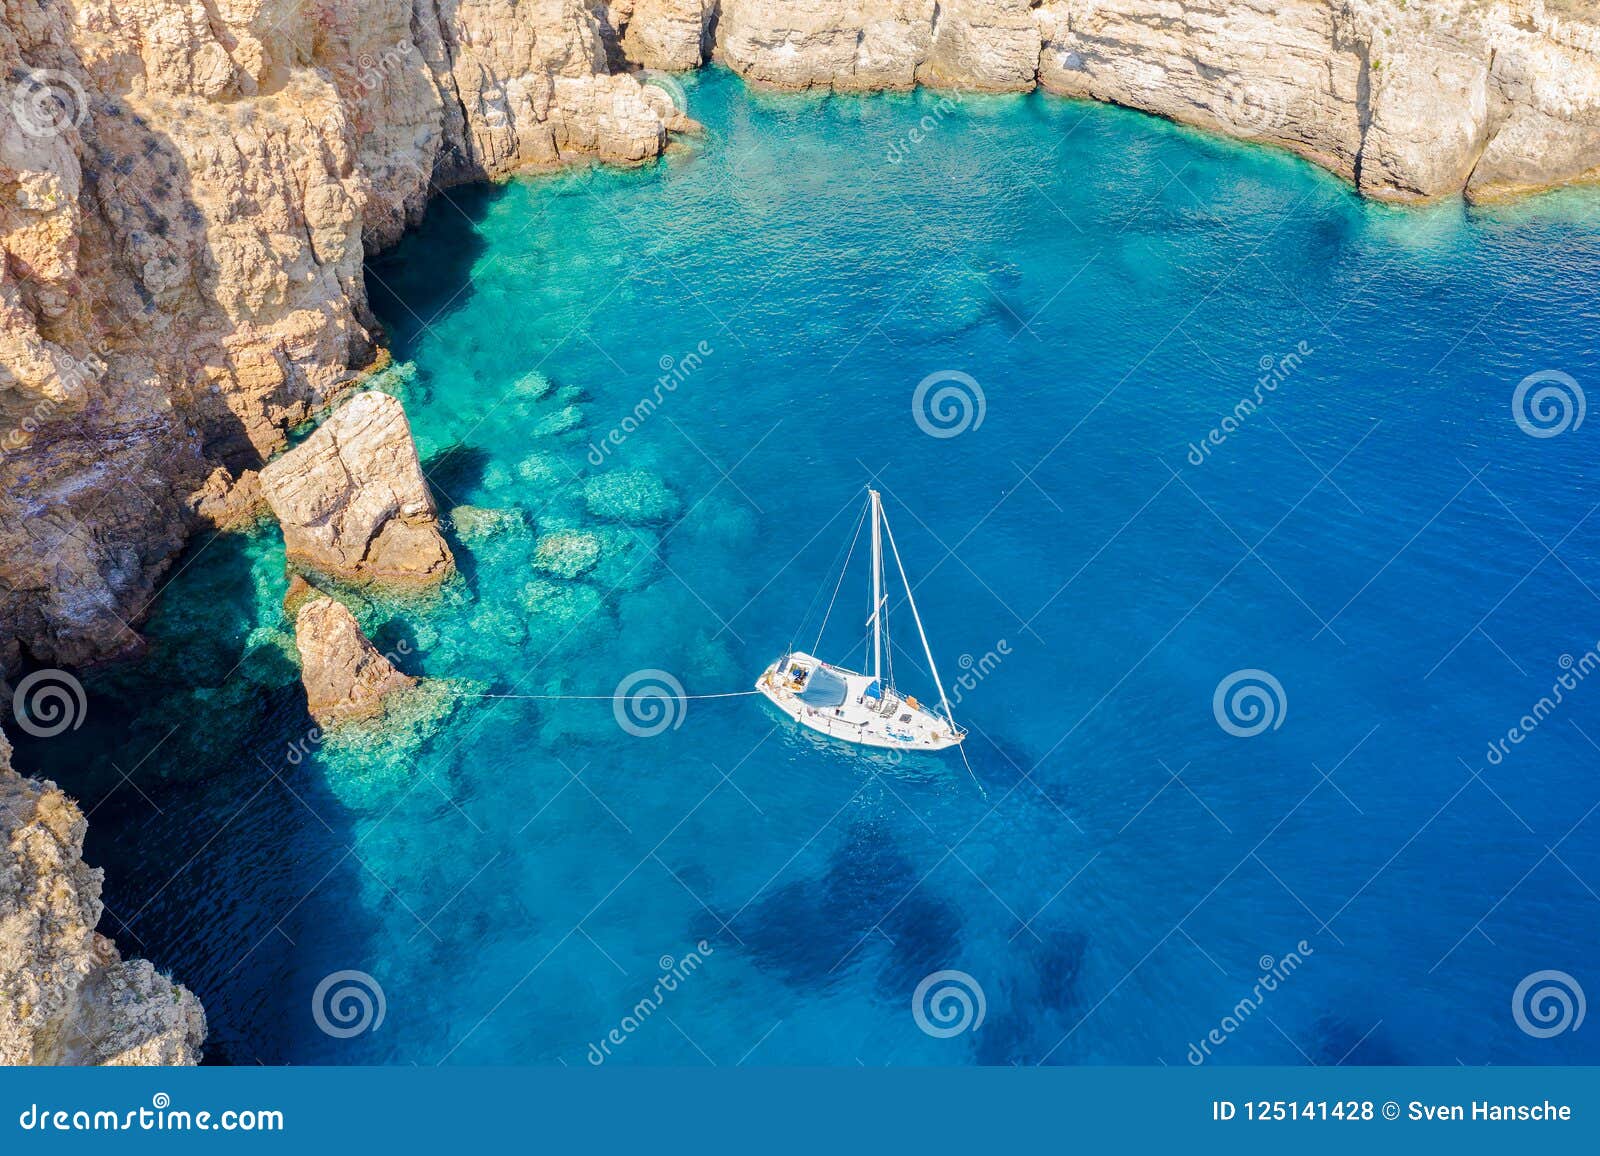 aerial view of a sailing boat in the aegean sea, greece